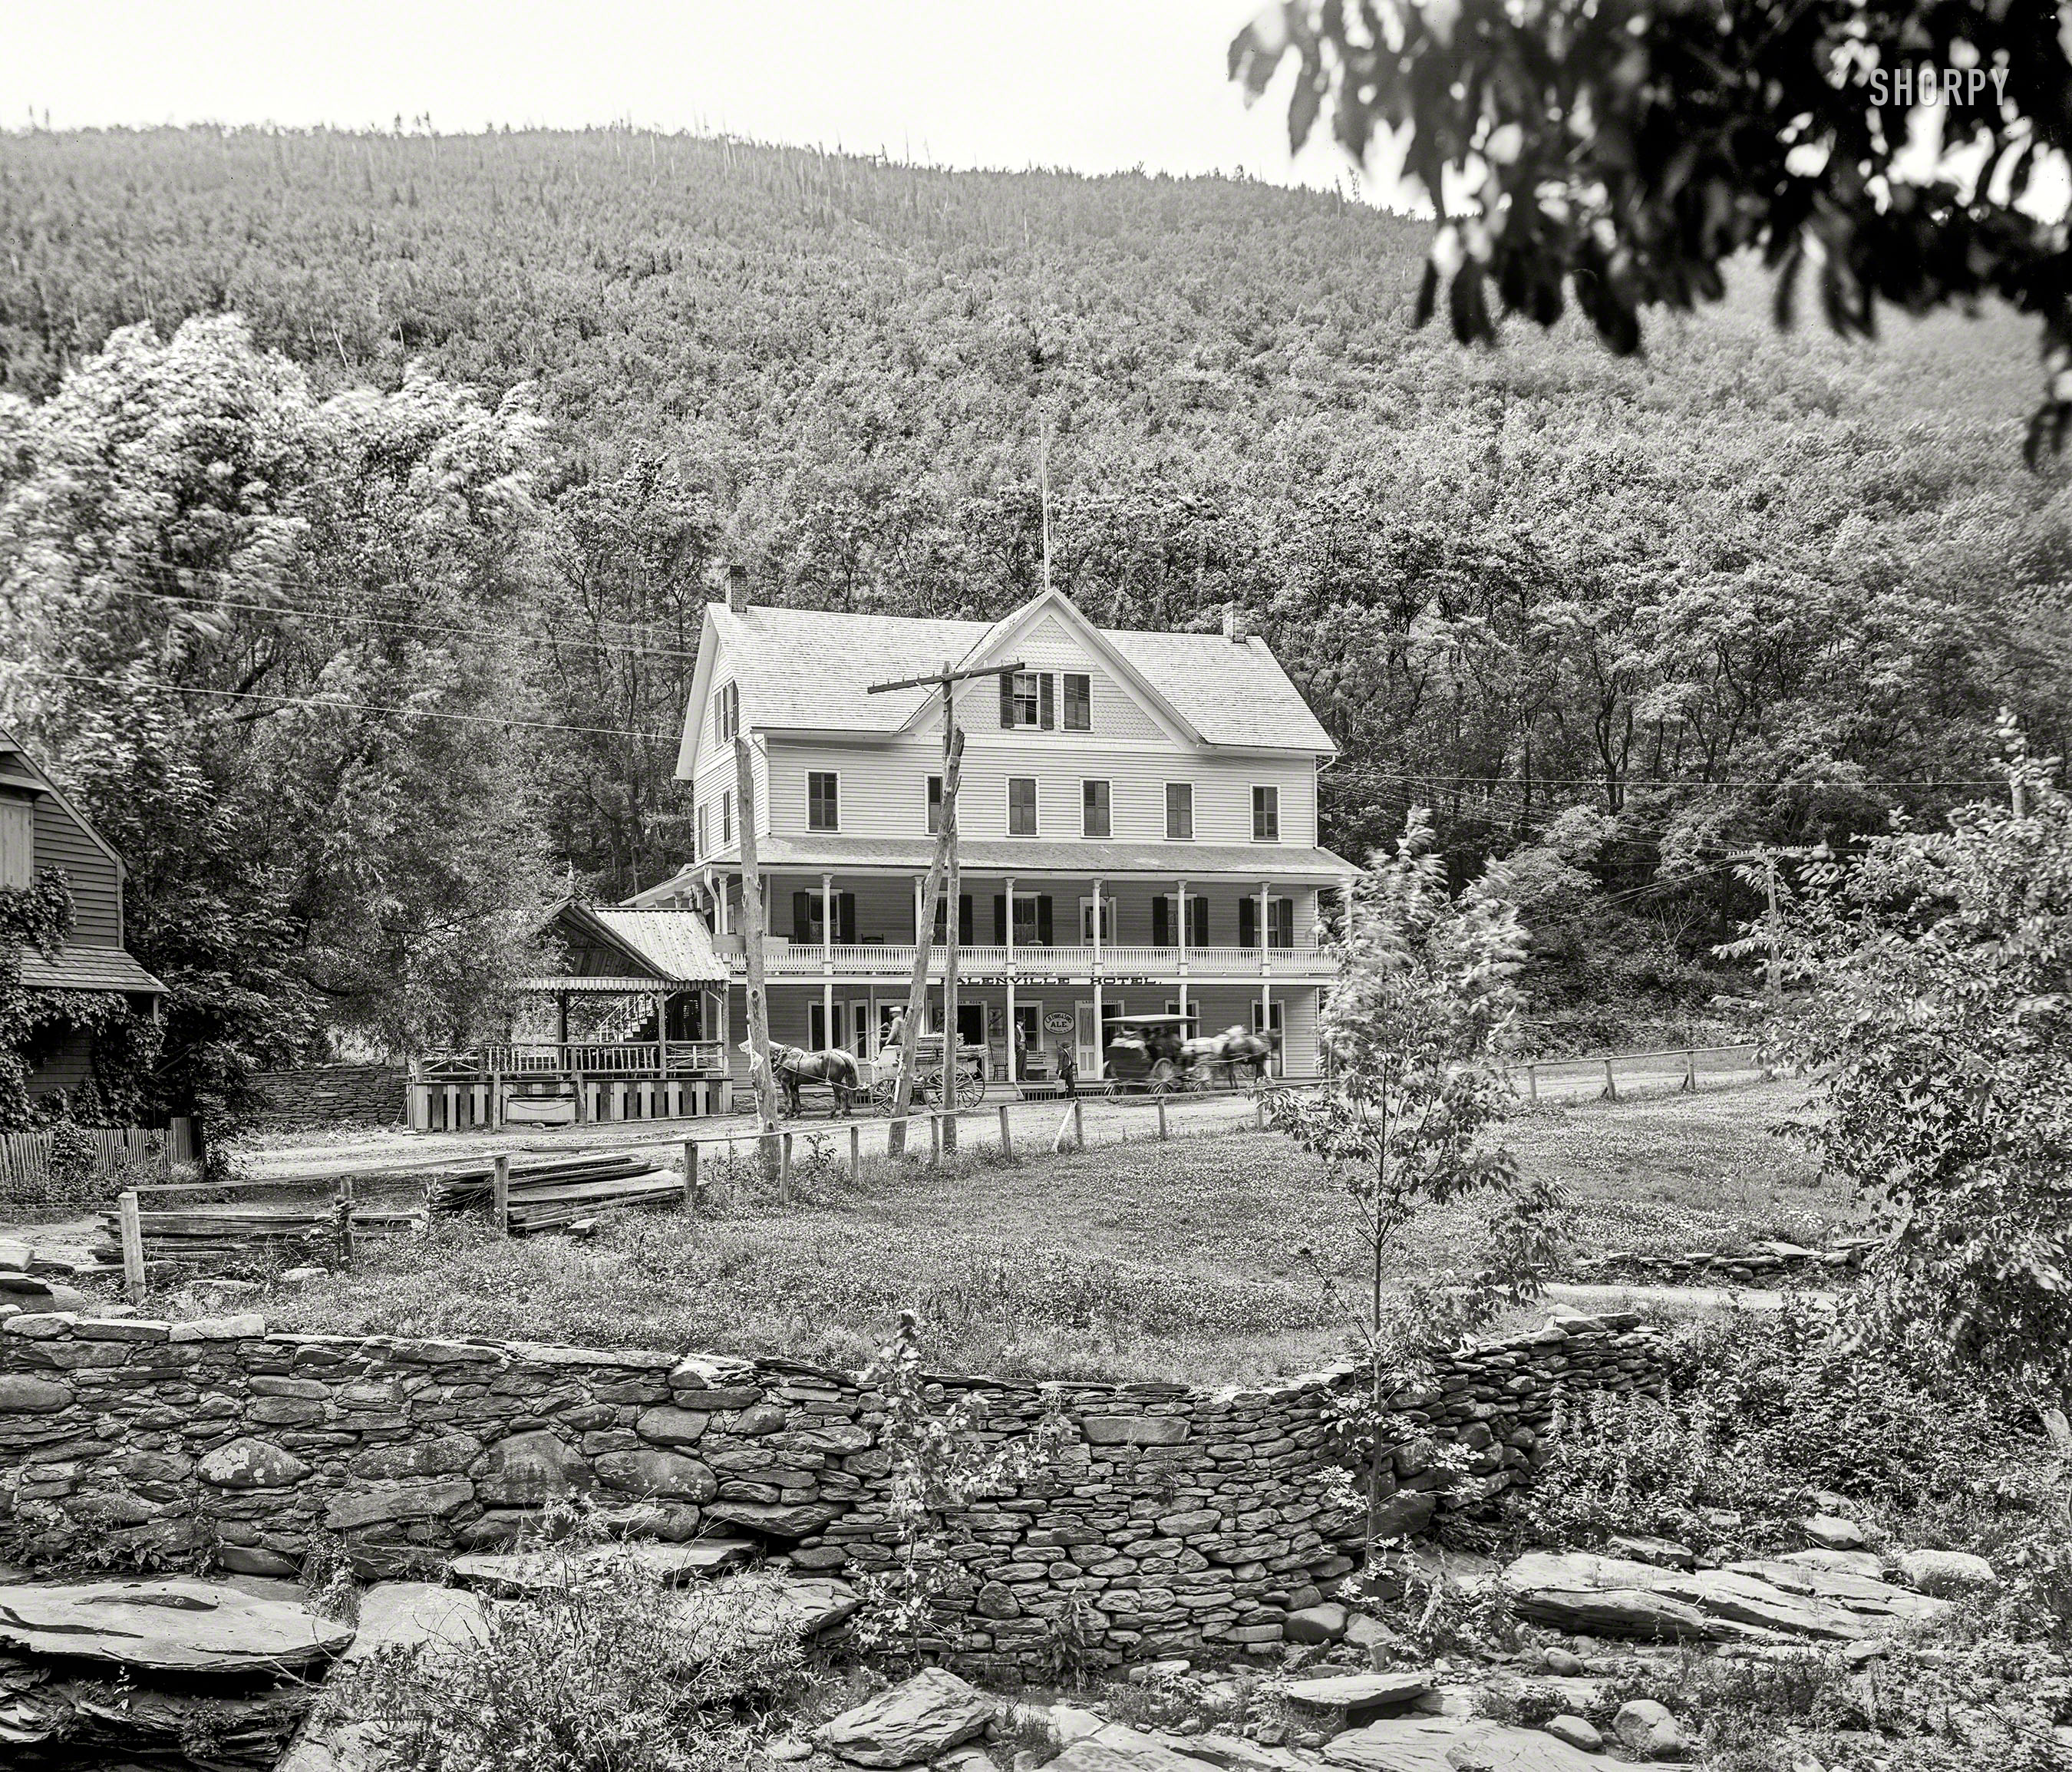 Greene County, N.Y., circa 1902. "Palenville Hotel, Catskill Mountains." 8x10 inch dry plate glass negative, Detroit Publishing Company. View full size.